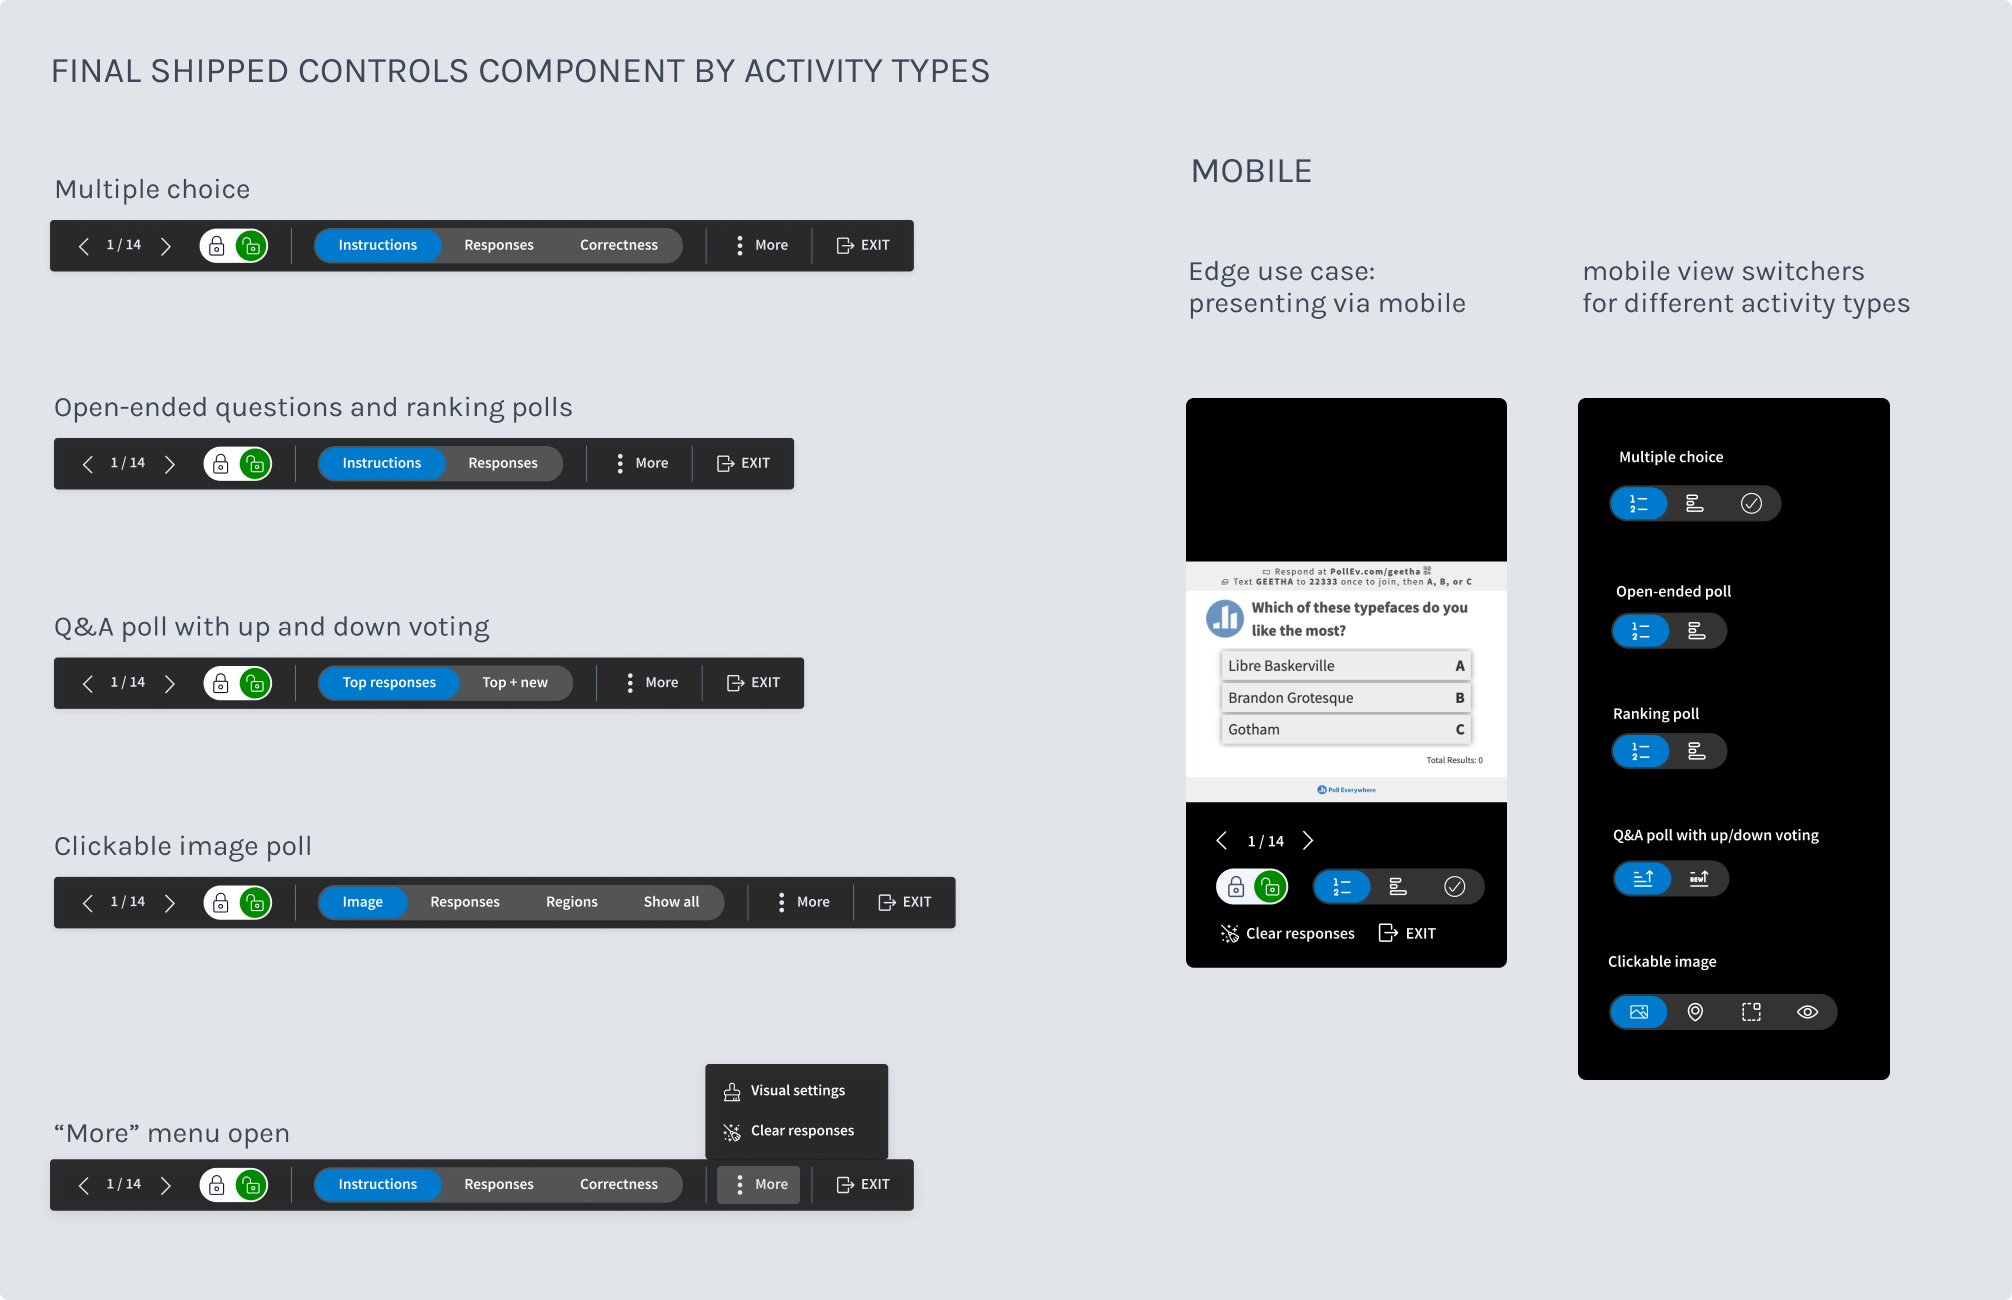 all the controls versions by activity type and mobile